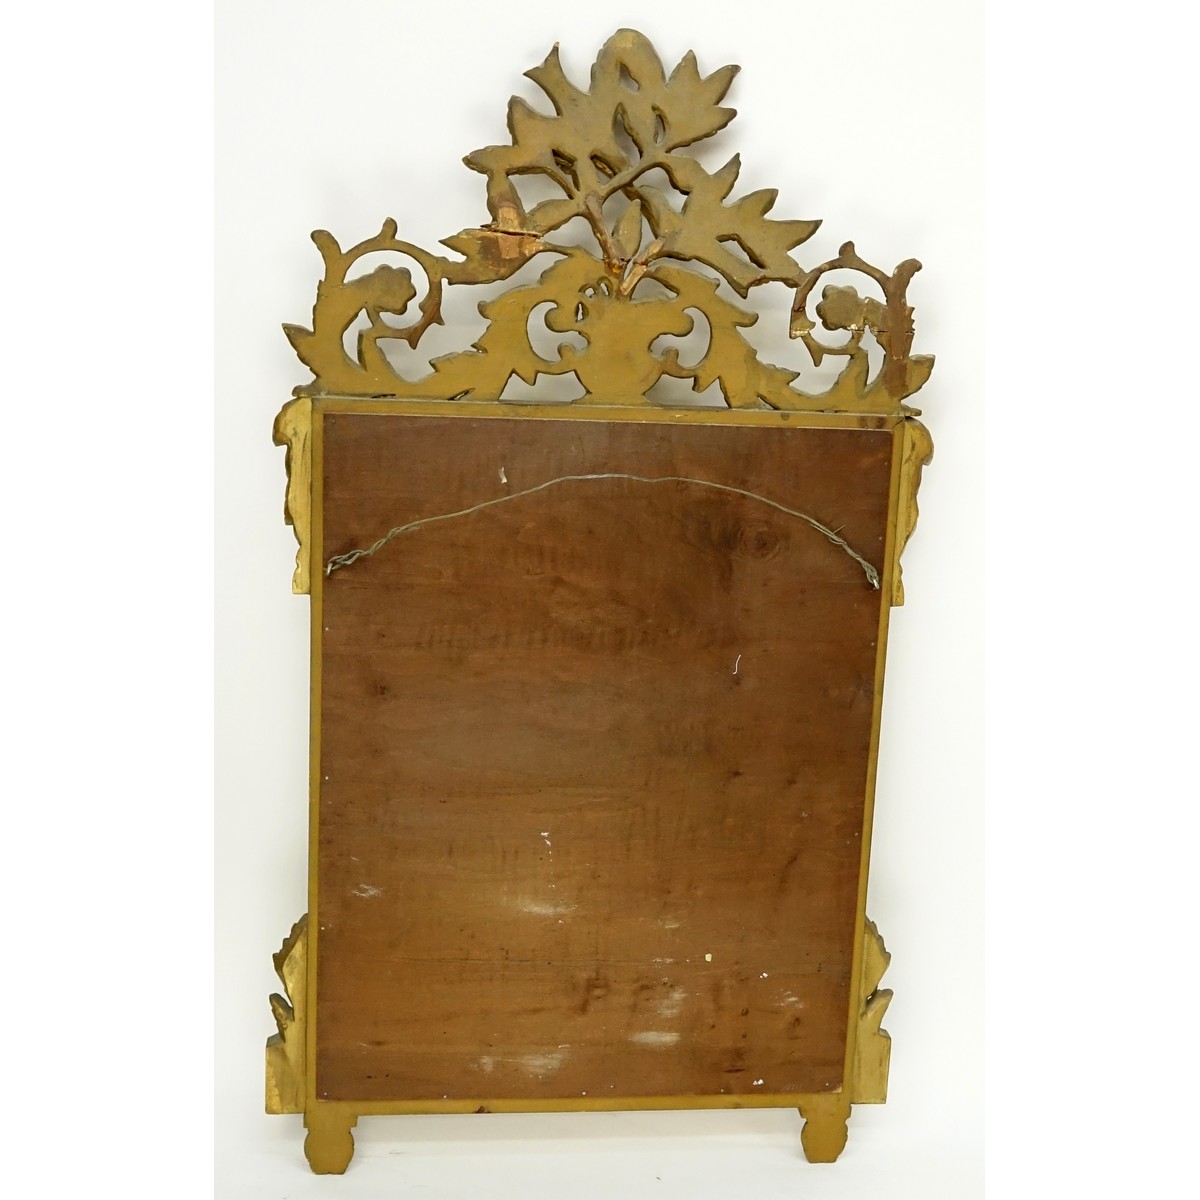 20th Century Carved Gilt Wood Decorative Mirror. Unsigned.